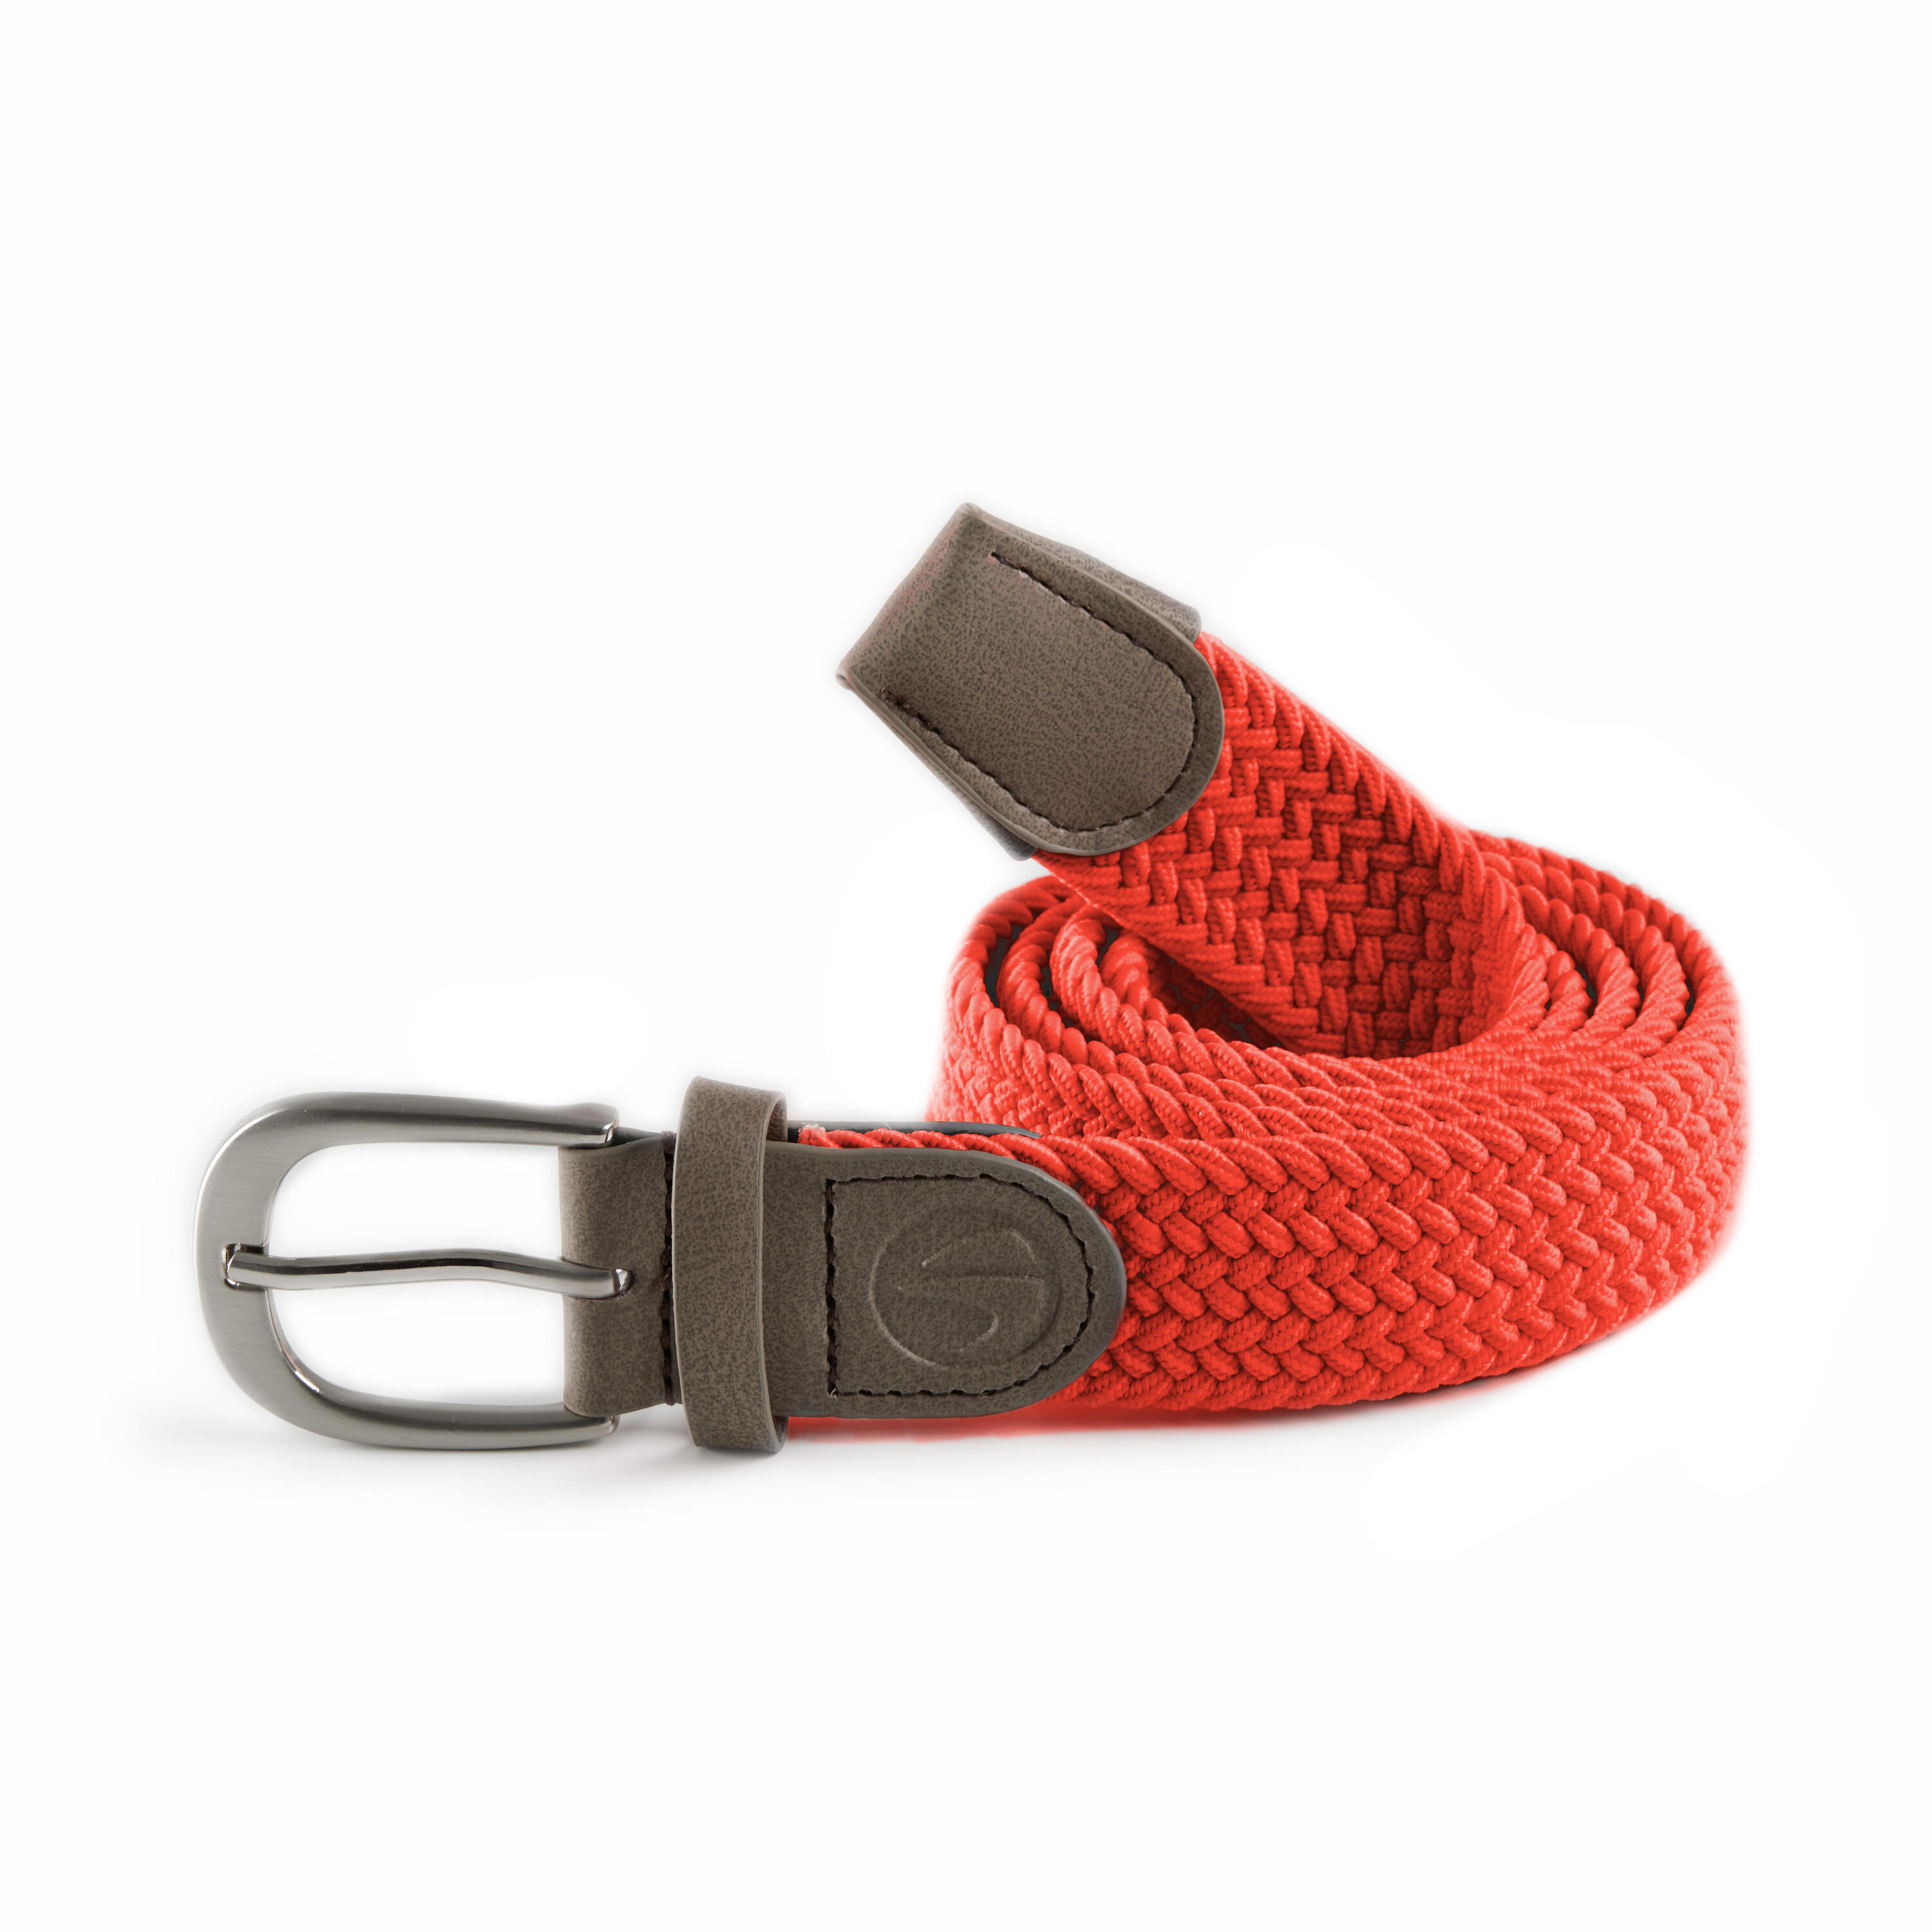 Red adult golf stretchy belt size 2 1/3